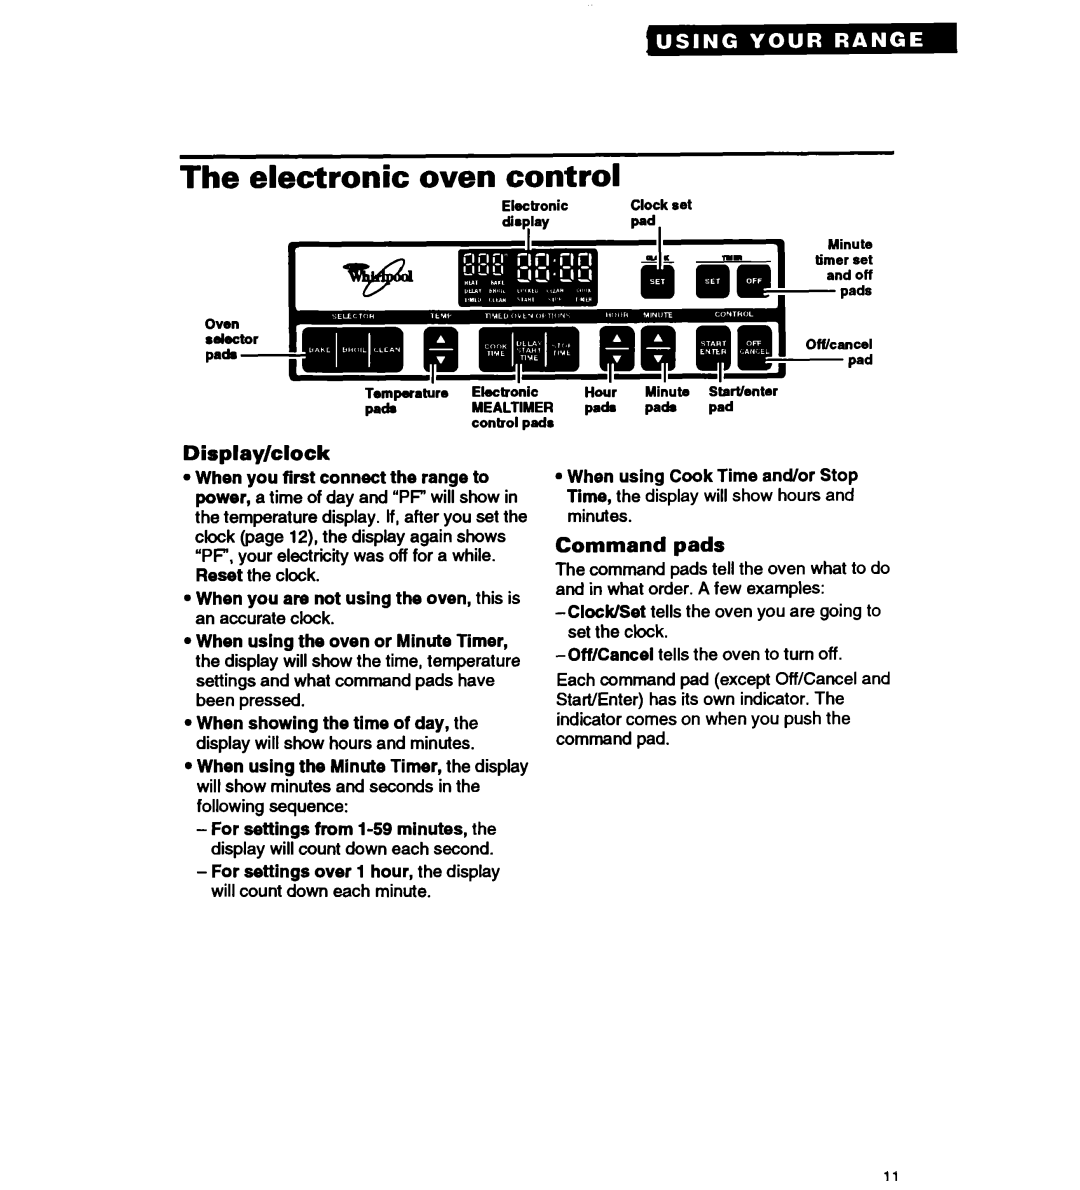 Whirlpool RS677PX important safety instructions The electronic oven control, Display/clock, Command pads 